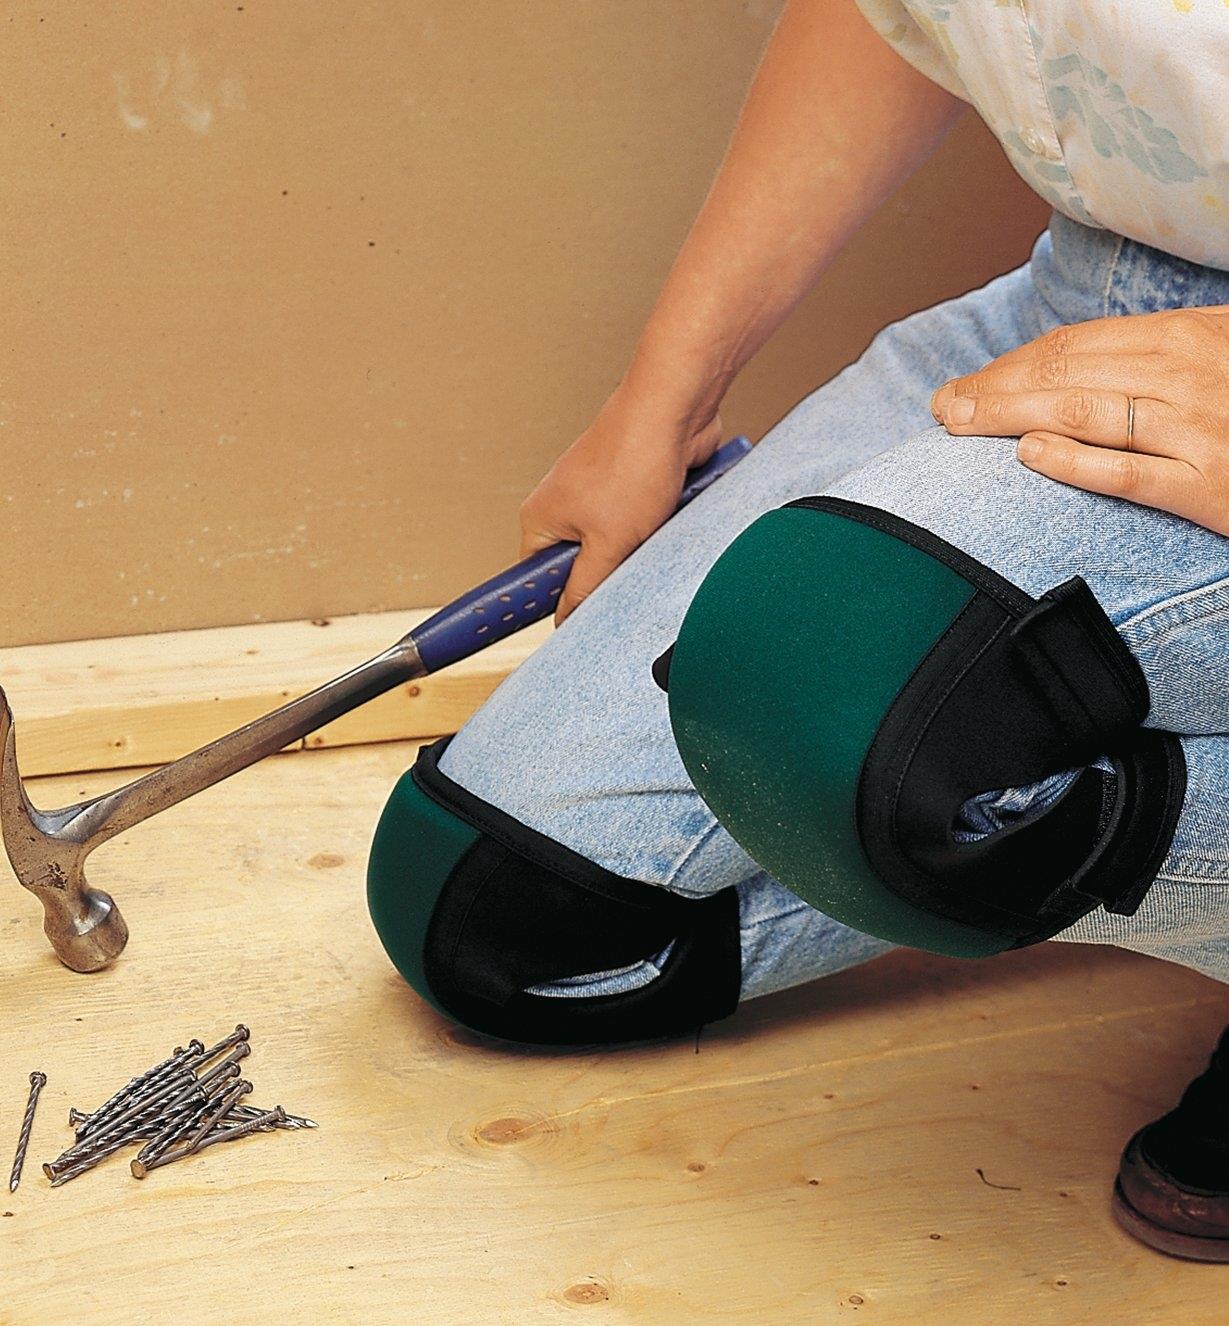 A woman wearing Contoured Knee Pads while doing construction